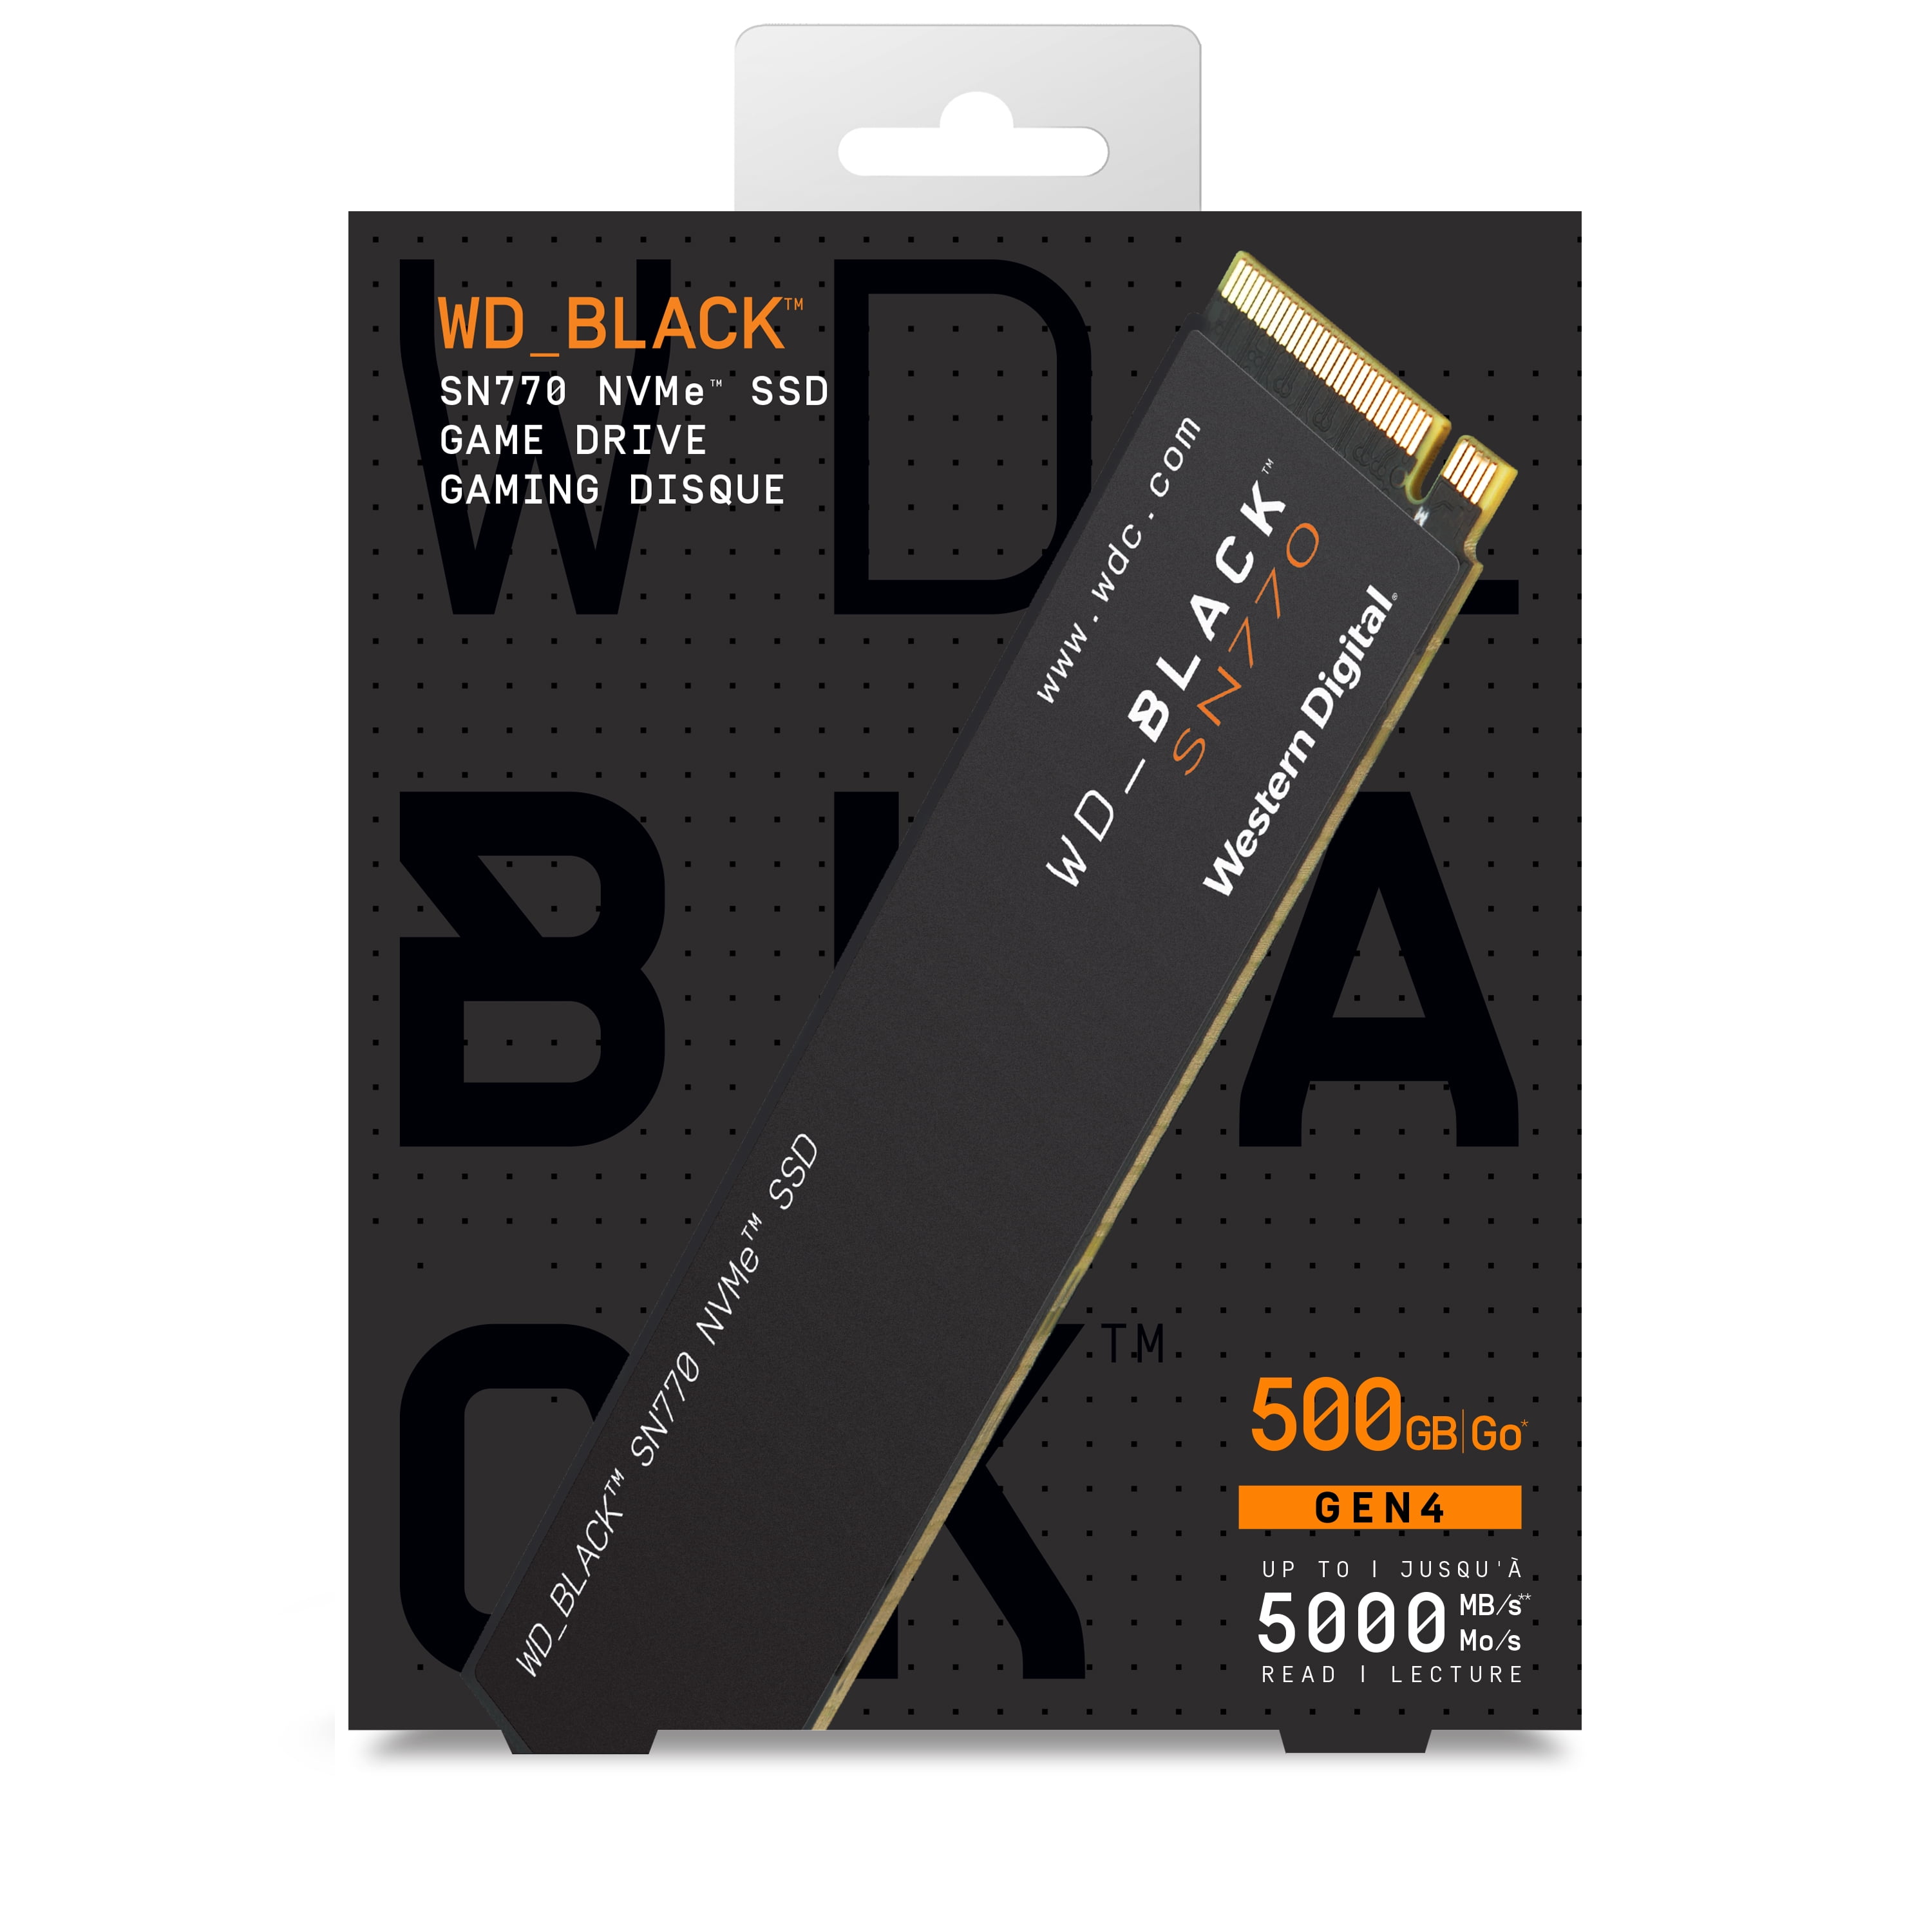 WD_BLACK 500GB SN770 NVMe Internal Gaming SSD Solid State Drive